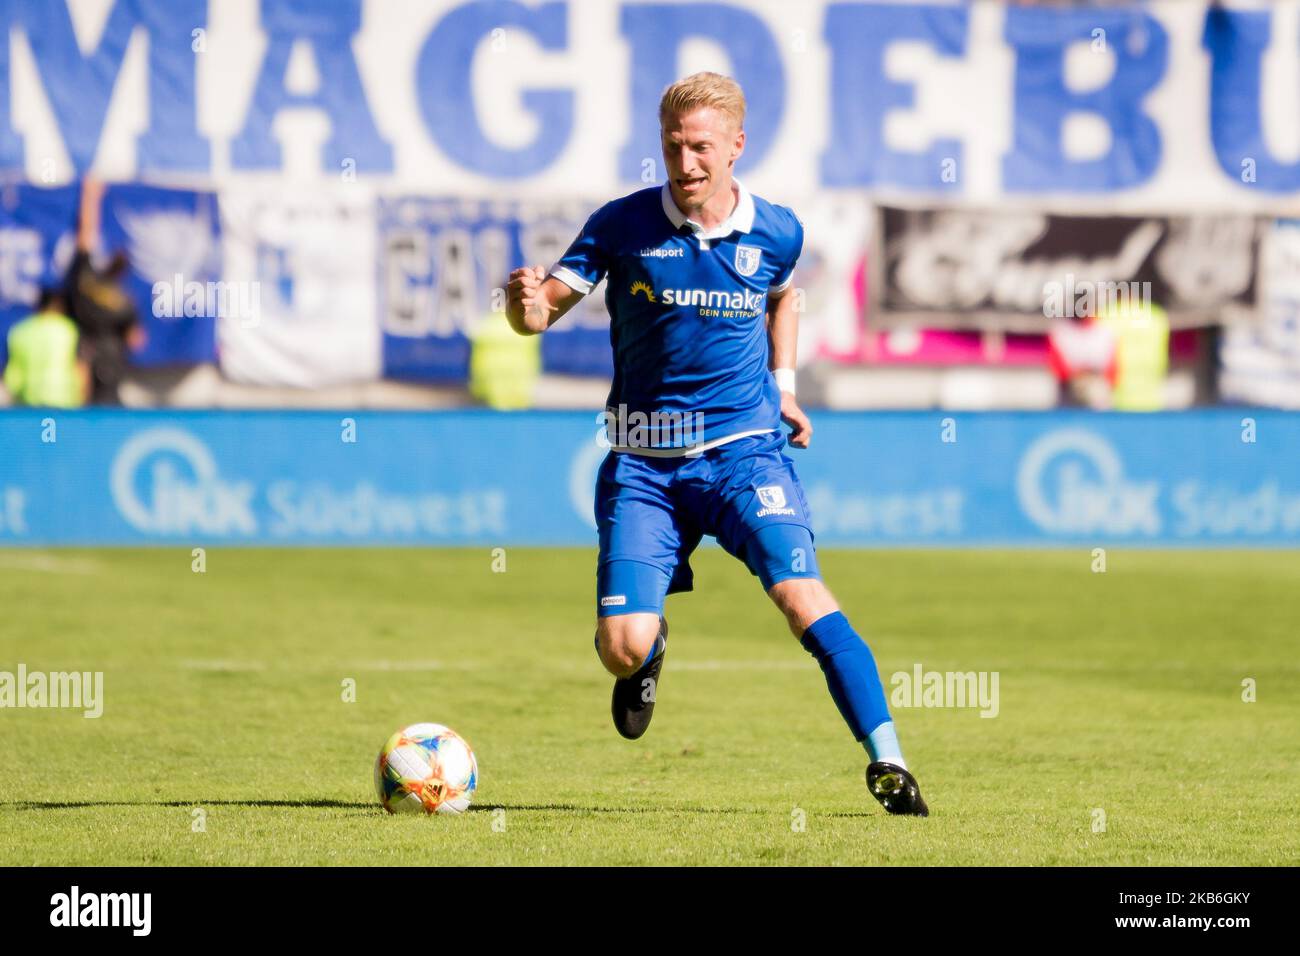 Dominik Ernst of 1. FC Magdeburg during the 3. Bundesliga match between 1. FC Kaiserslautern and 1. FC Magdeburg at the Fritz-Walter-Stadium on September 21, 2019 in Kaiserslautern, Germany. (Photo by Peter Niedung/NurPhoto) Stock Photo